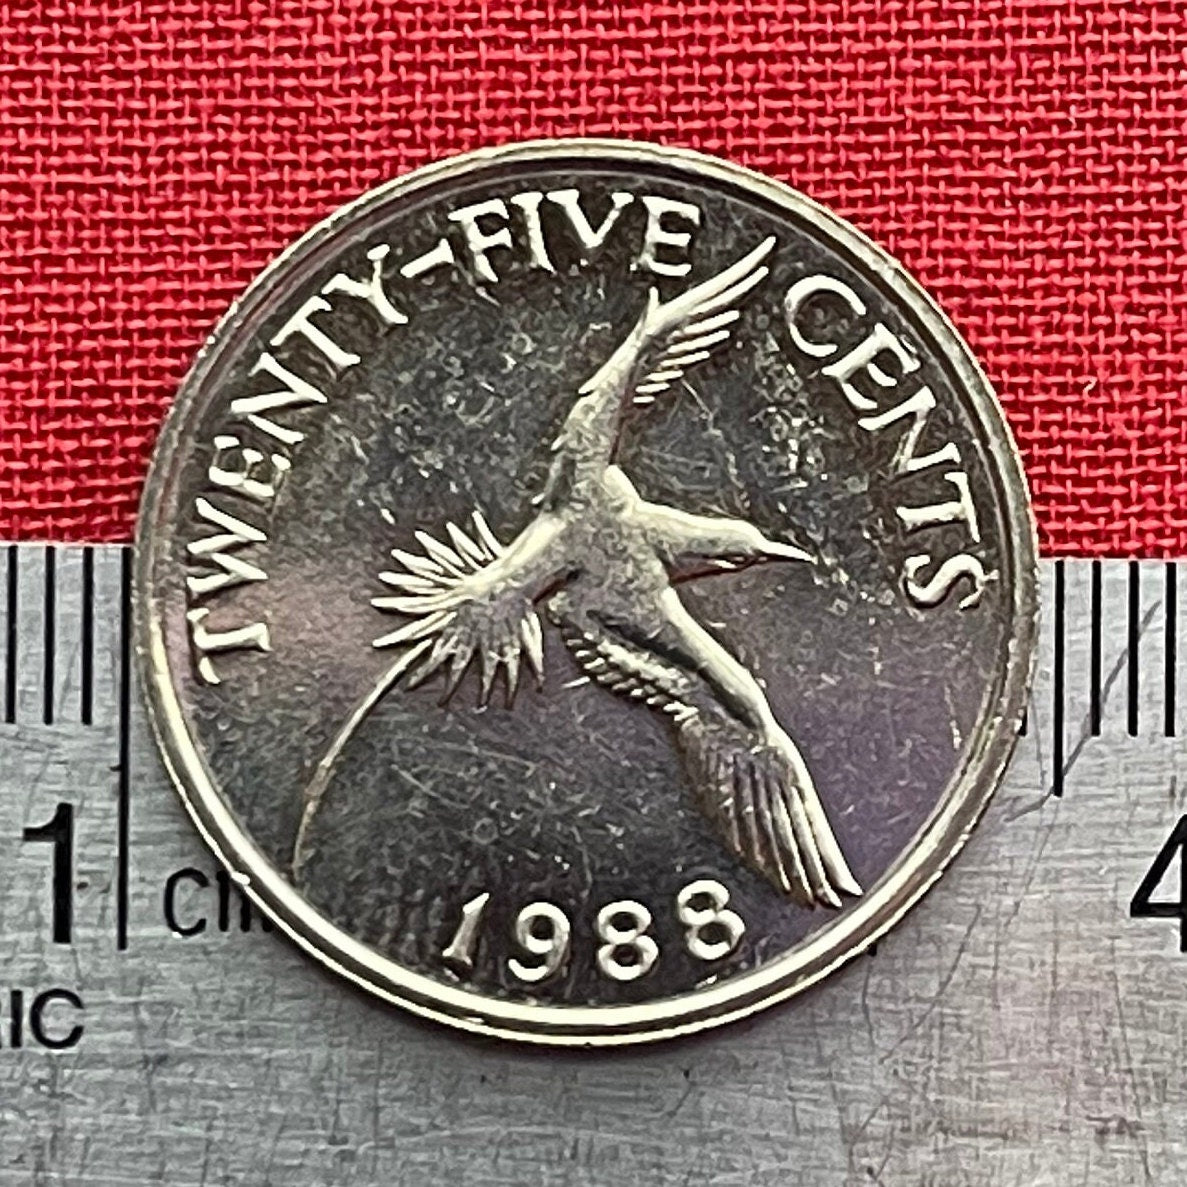 White-Tailed Tropicbird 25 Cents Bermuda Authentic Coin Money for Jewelry and Craft Making (Chamorro Death-Screaming Utak)